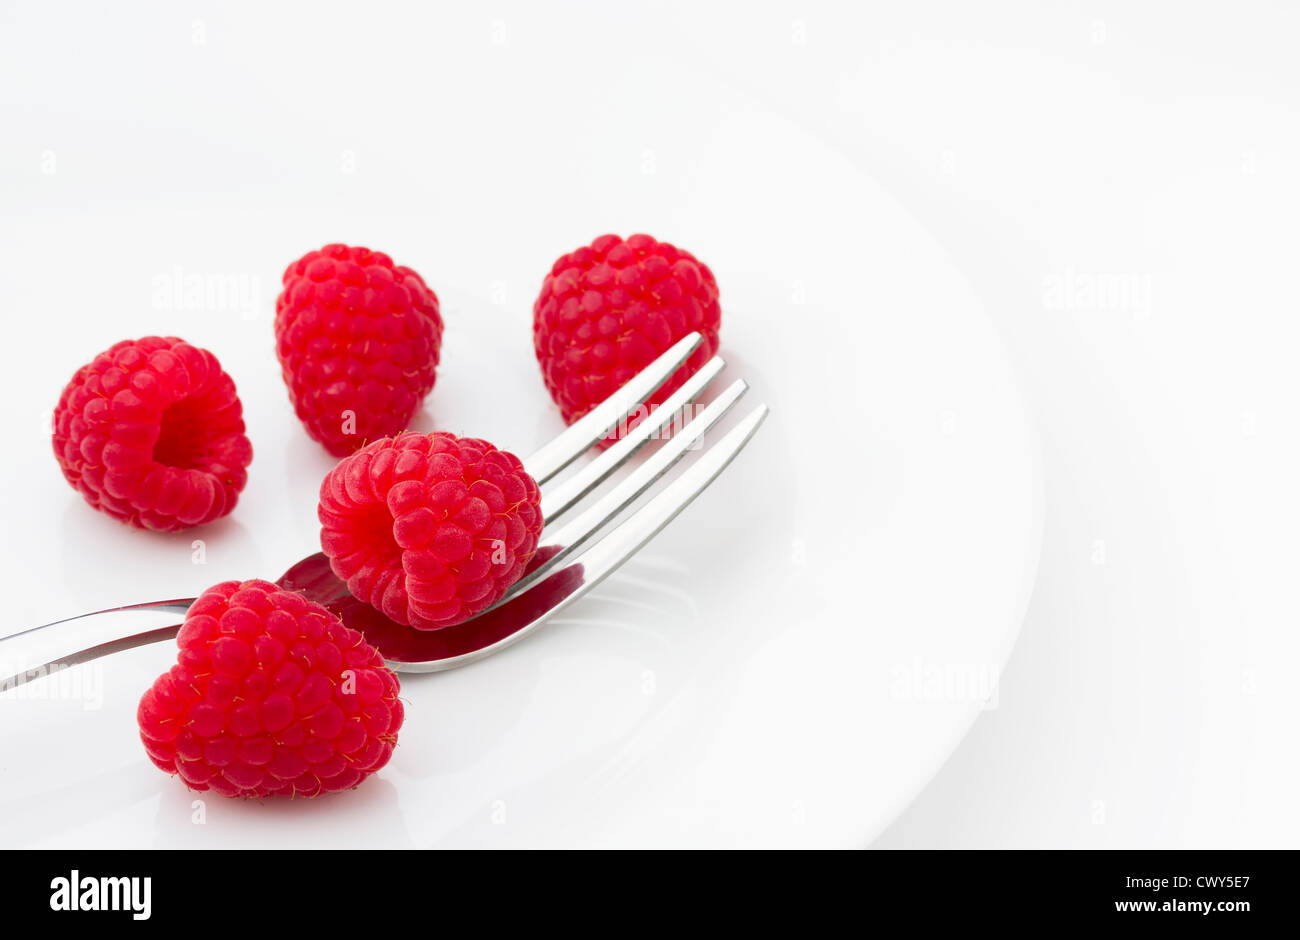 Red ripe raspberries on a plate Stock Photo